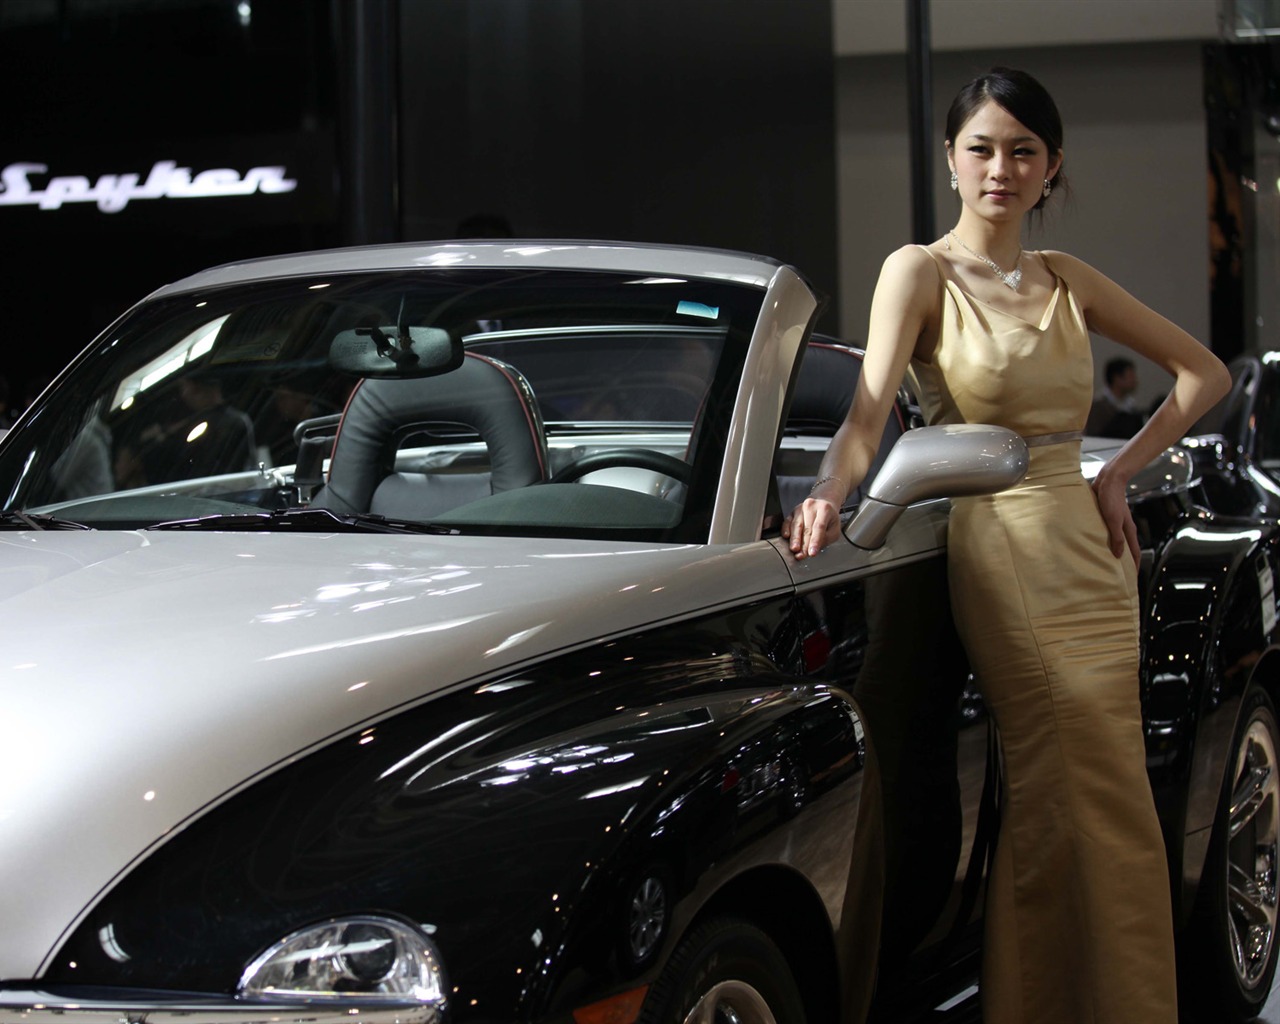 2010 Beijing International Auto Show beauty (1) (the wind chasing the clouds works) #26 - 1280x1024